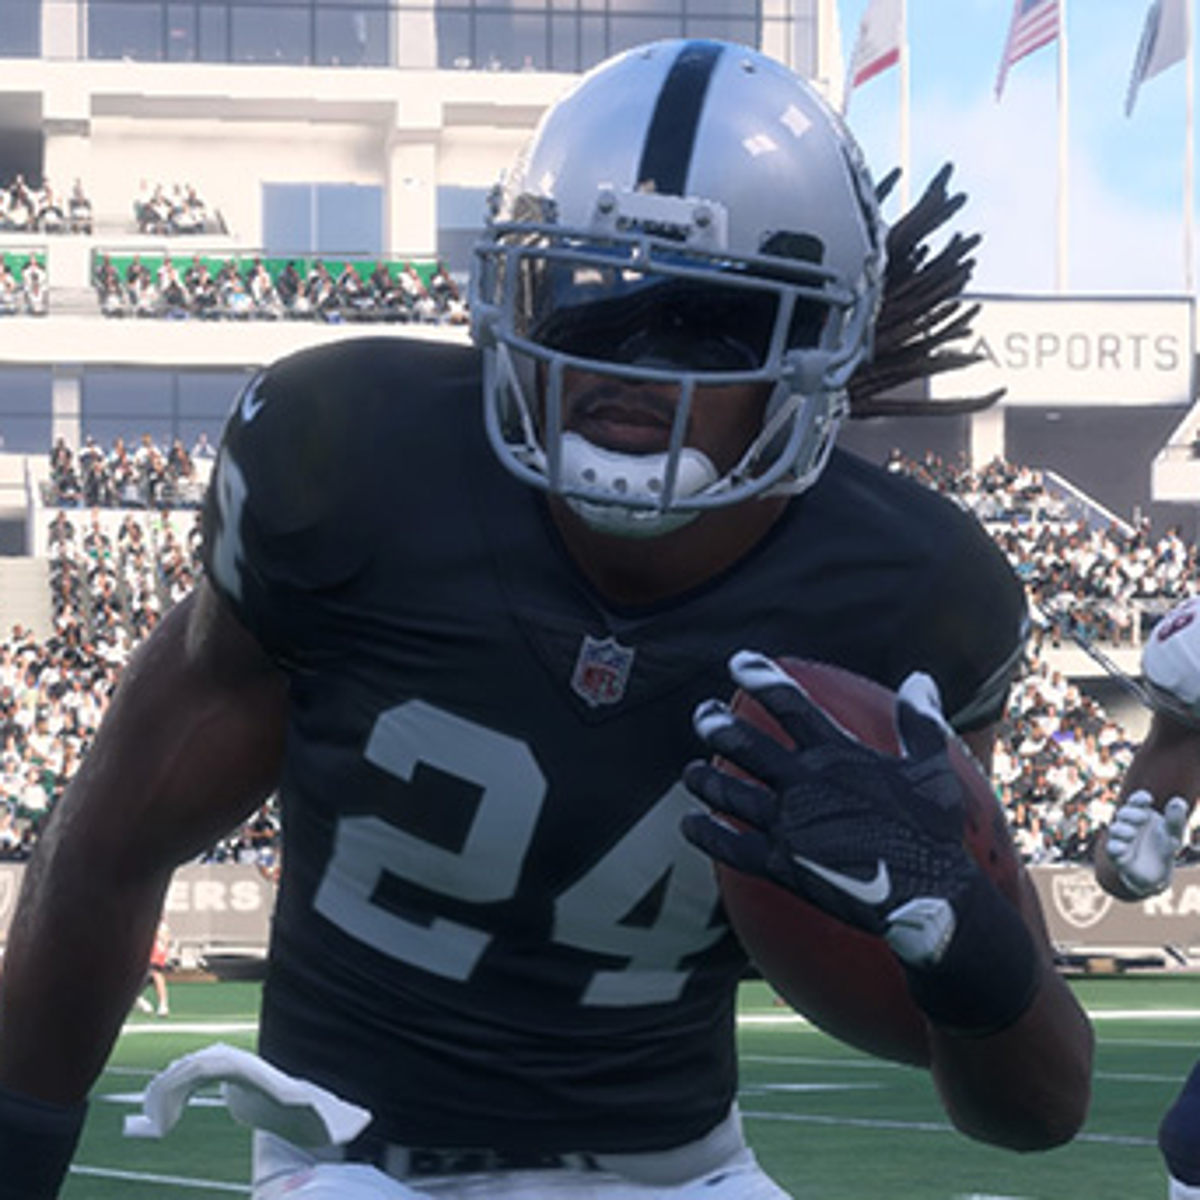 Madden NFL 18 Review: Tries to Go Deep This Year With a New Story Mode | VG247